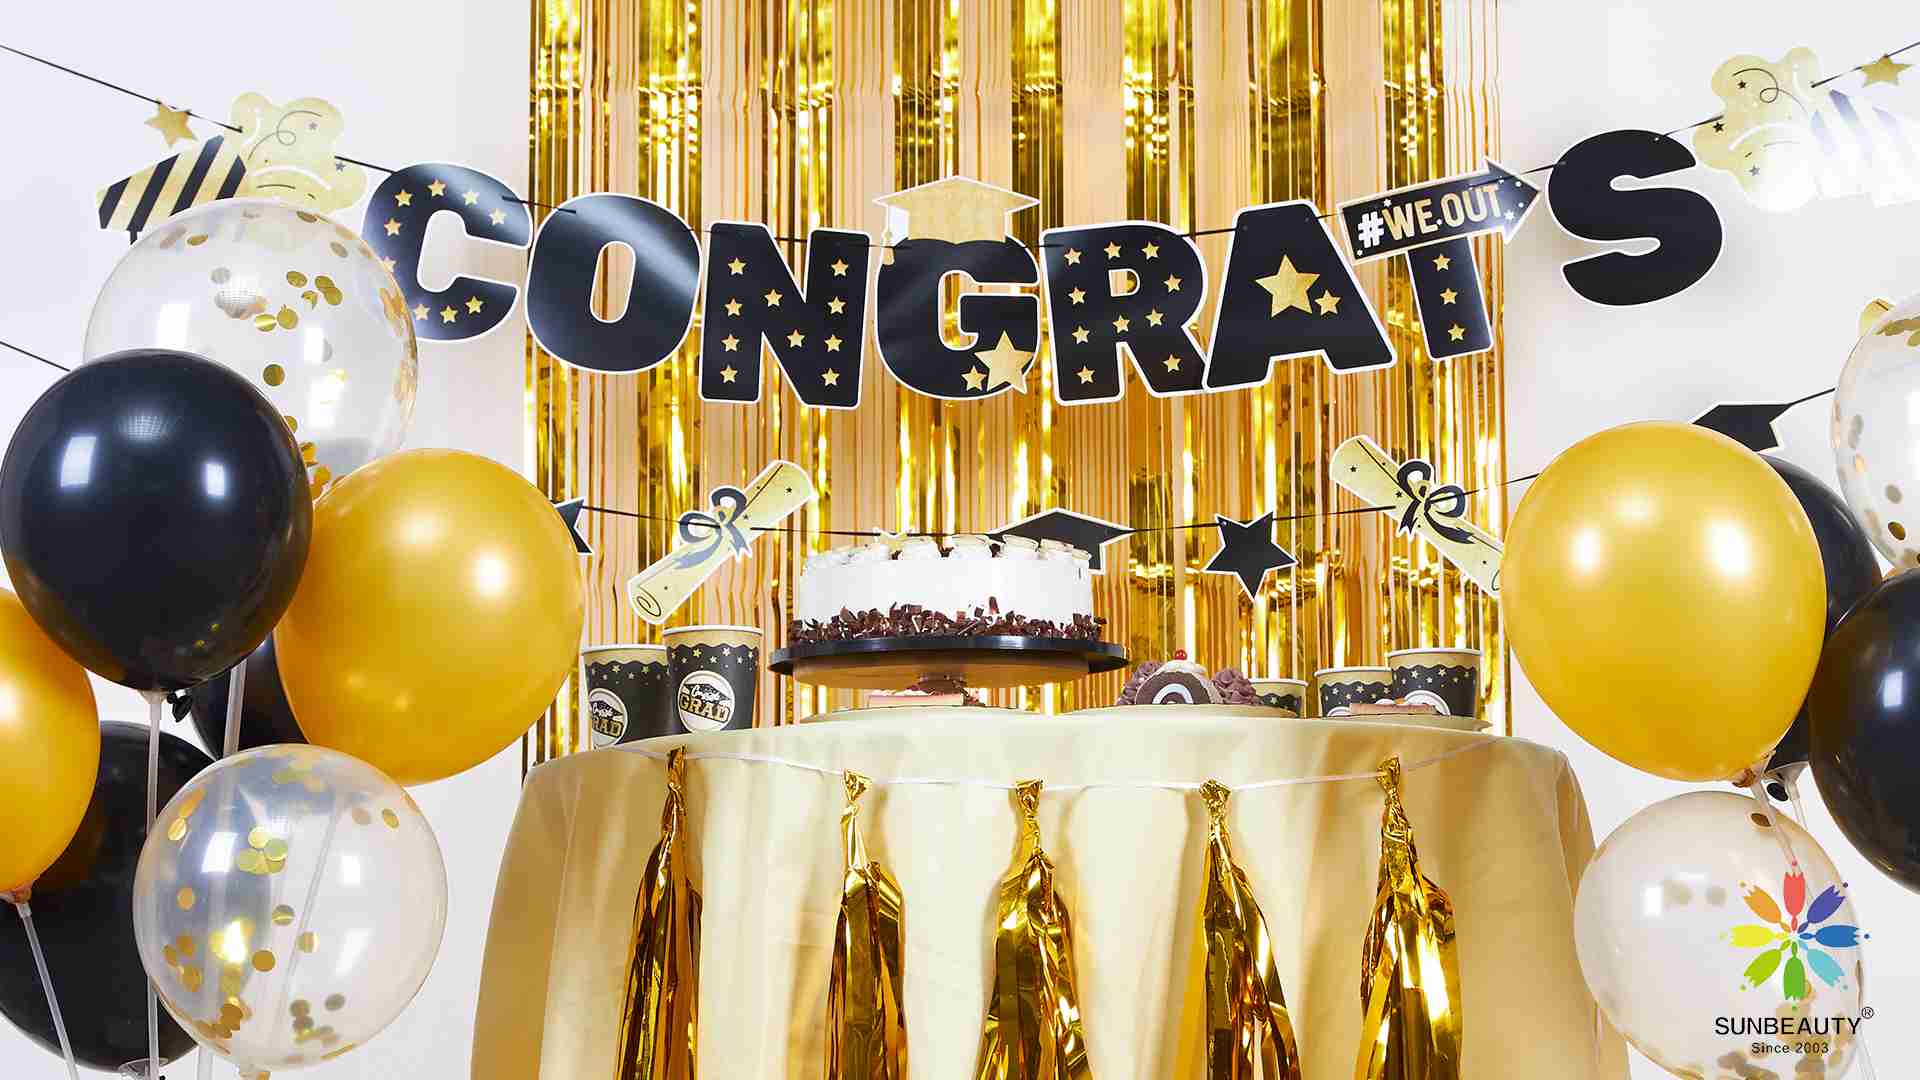 graduation party decorations with graduats banner, tableware set, black and gold balloons